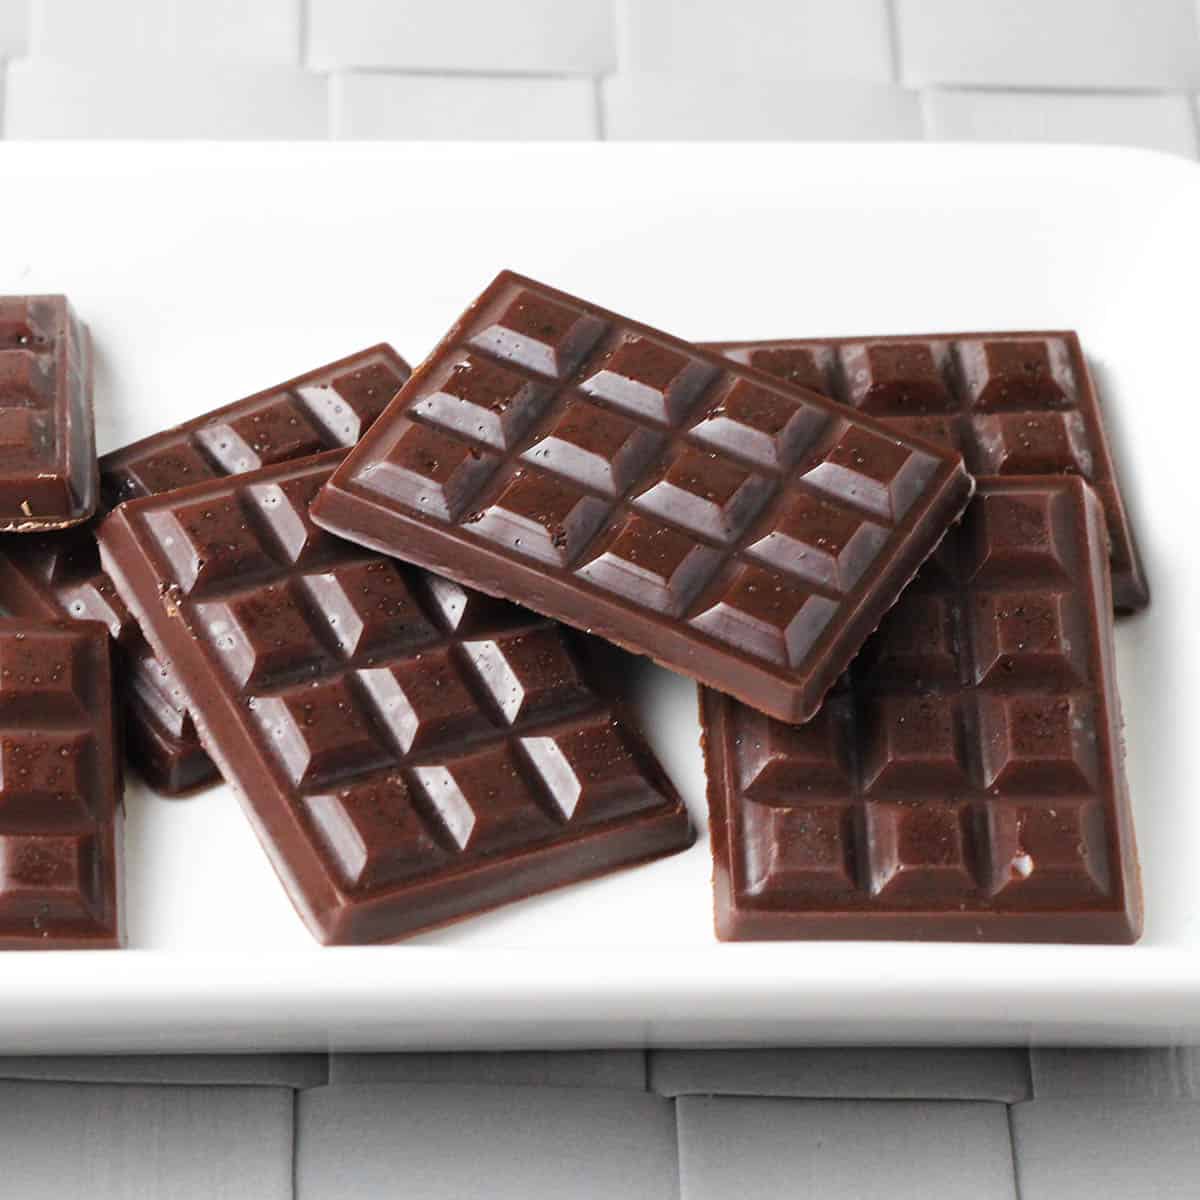 several pieces of raw chocolate on a white plate